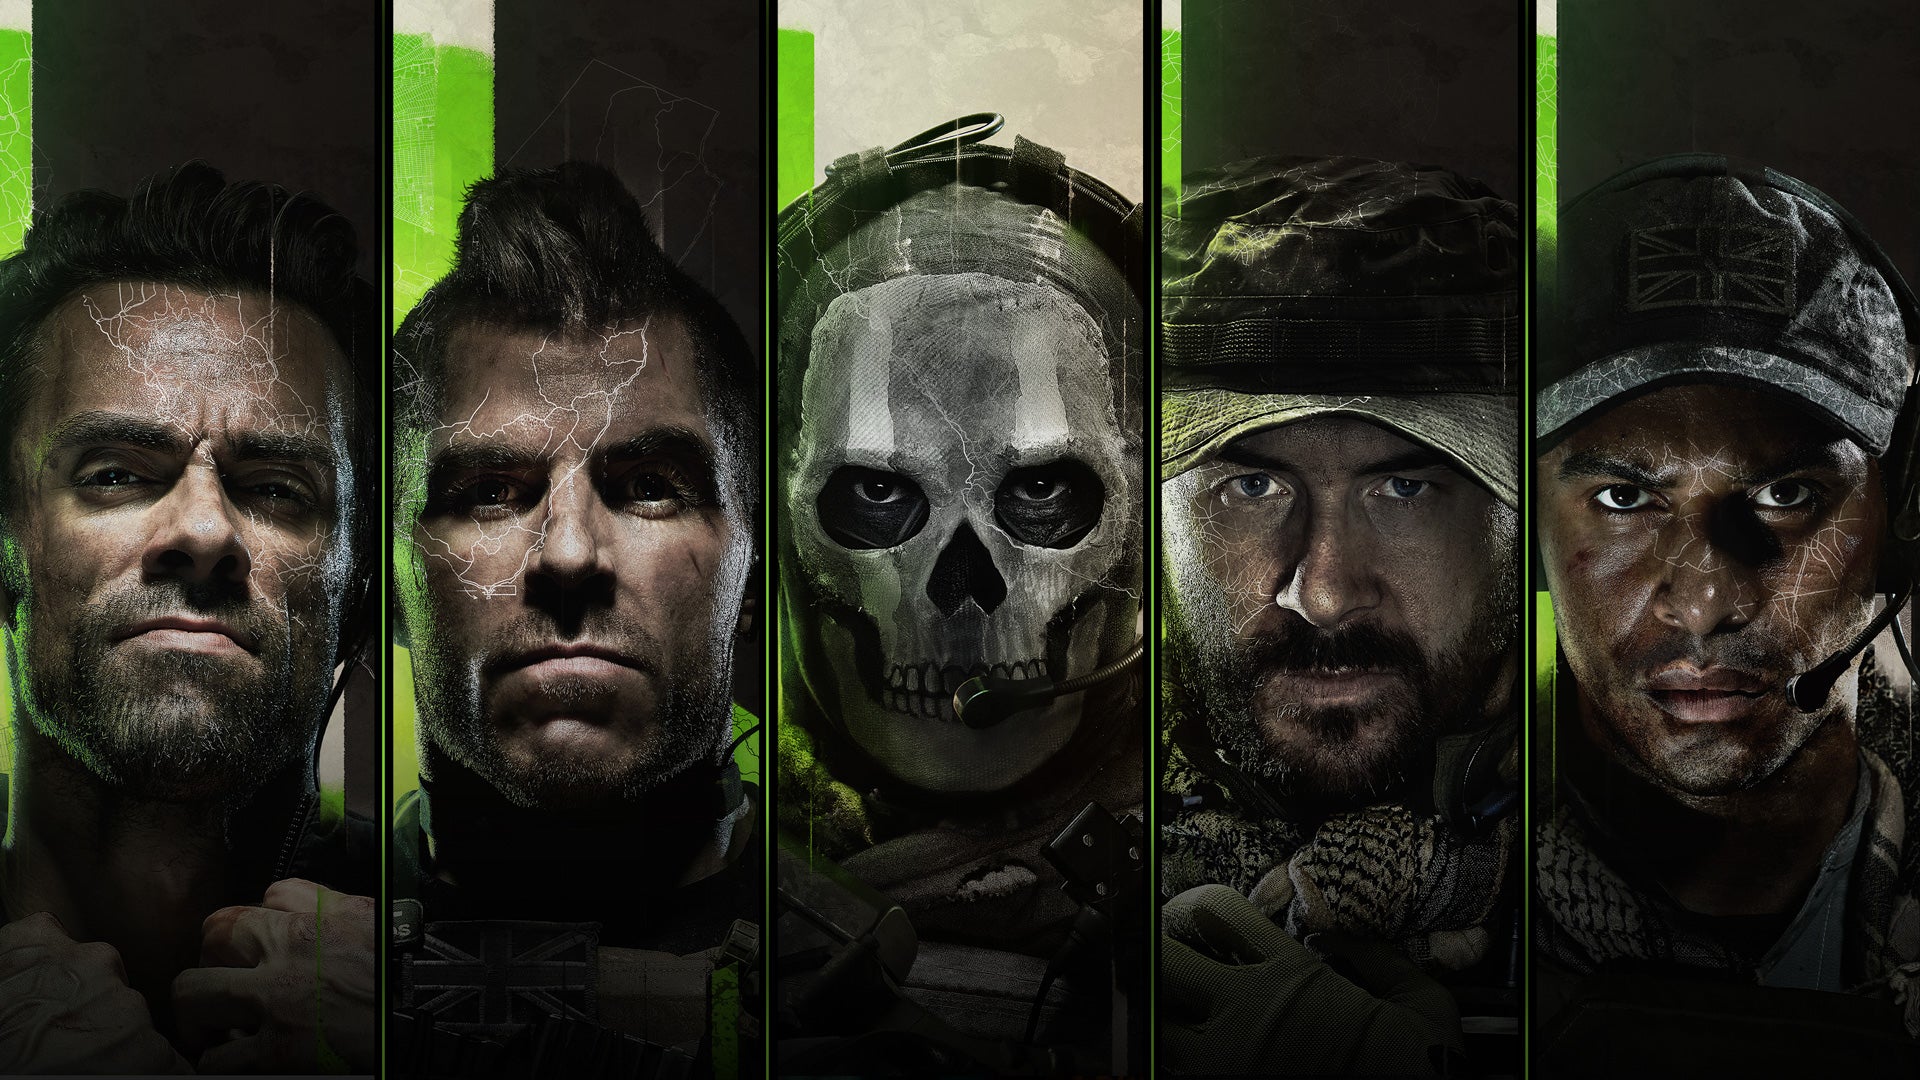 Image for Call of Duty: Modern Warfare 2 editions and benefits of each detailed